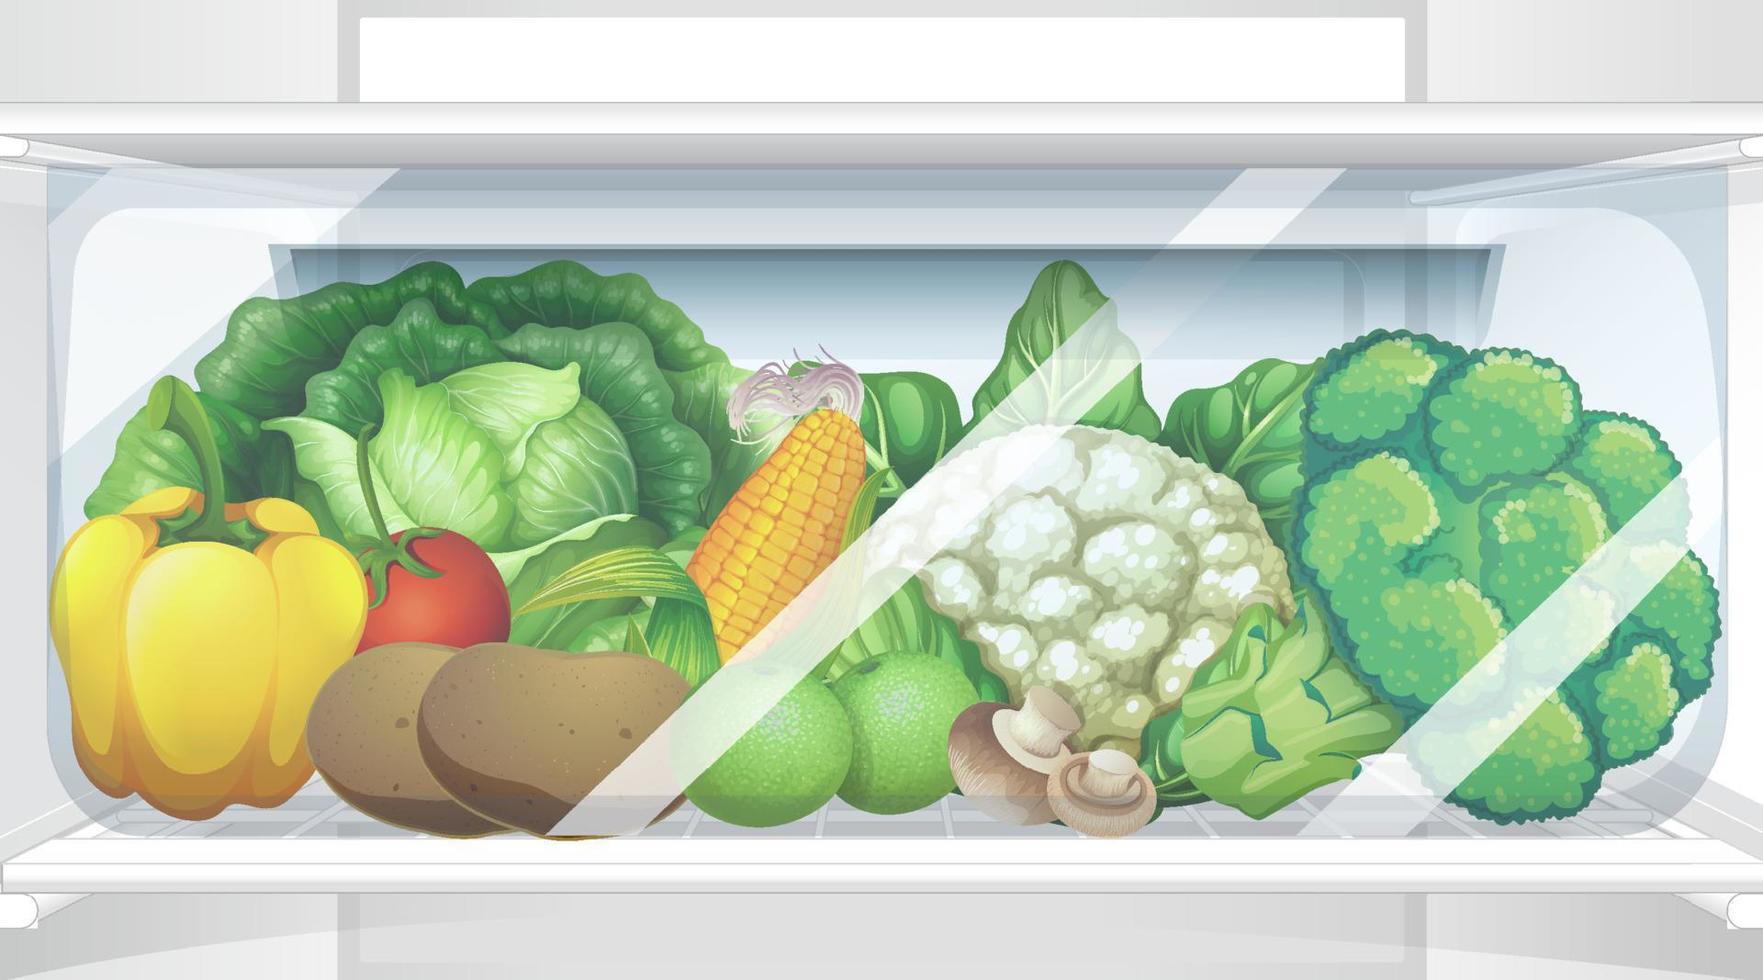 An inside the refrigerator with vegetable vector